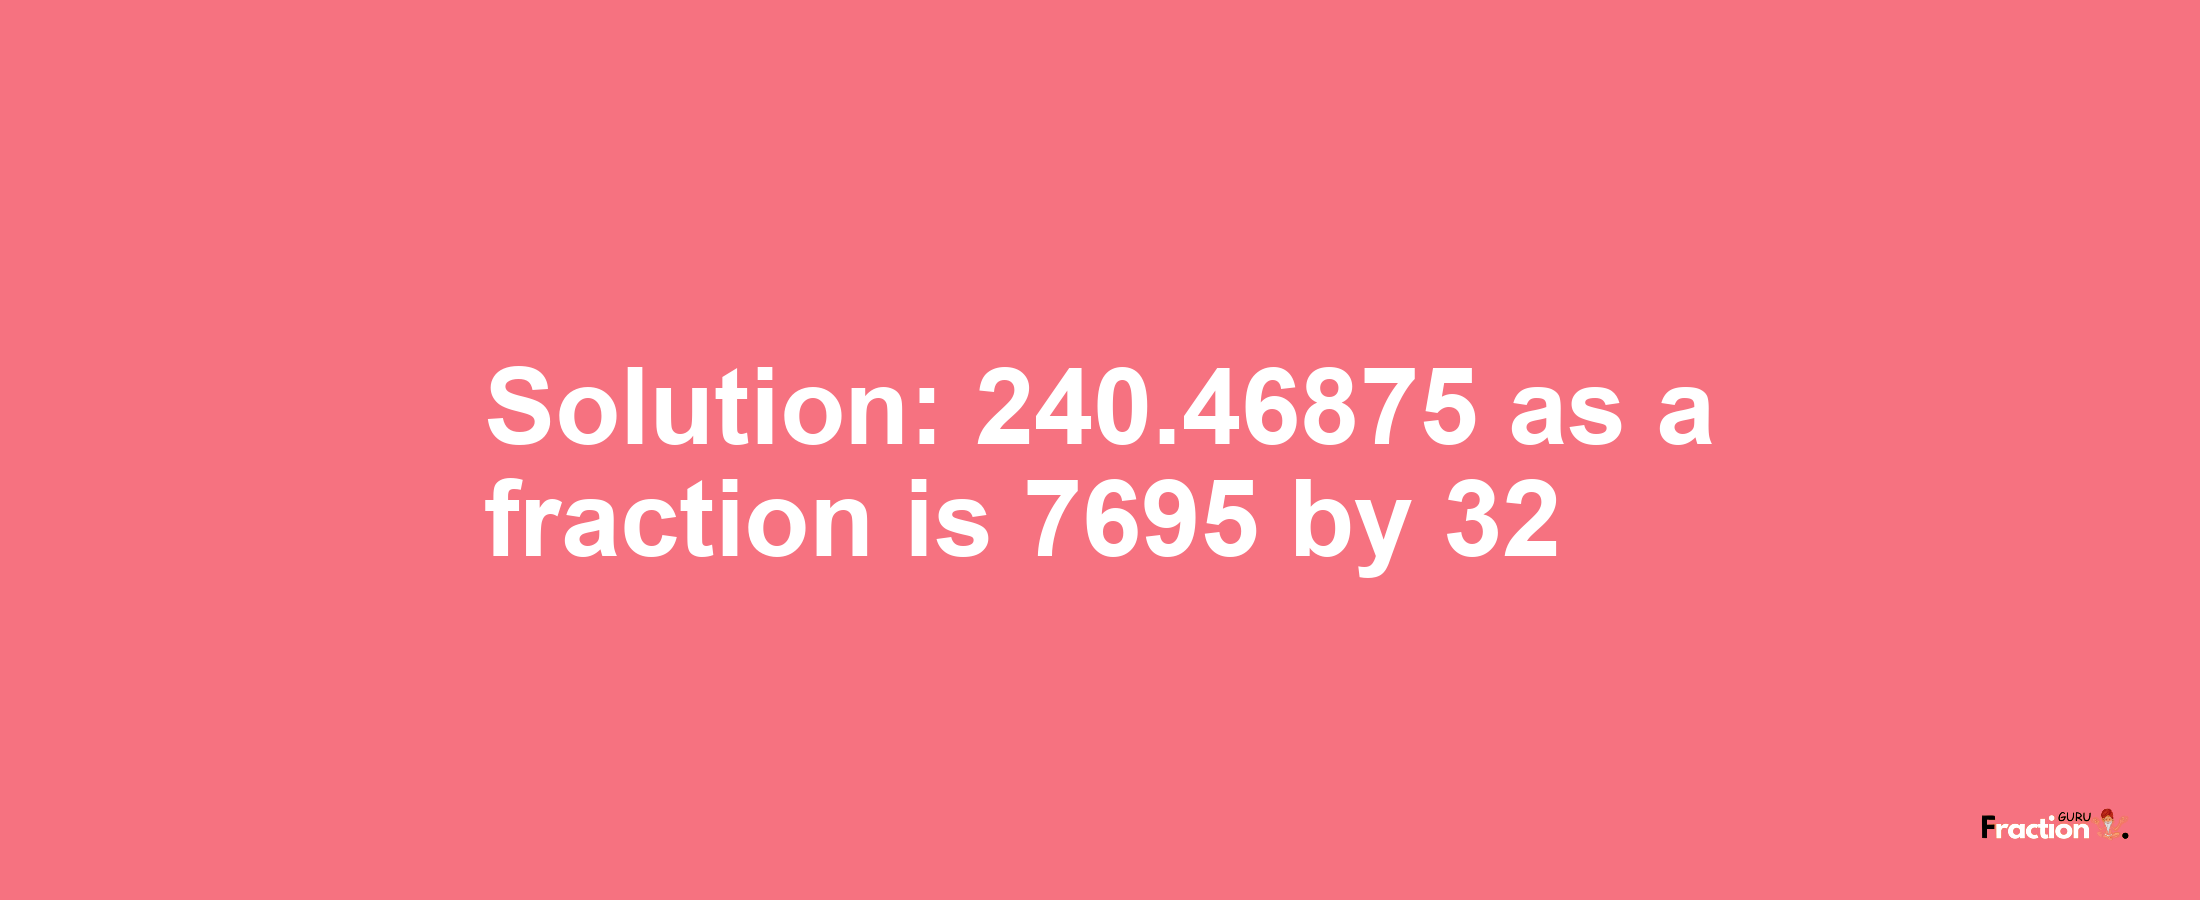 Solution:240.46875 as a fraction is 7695/32